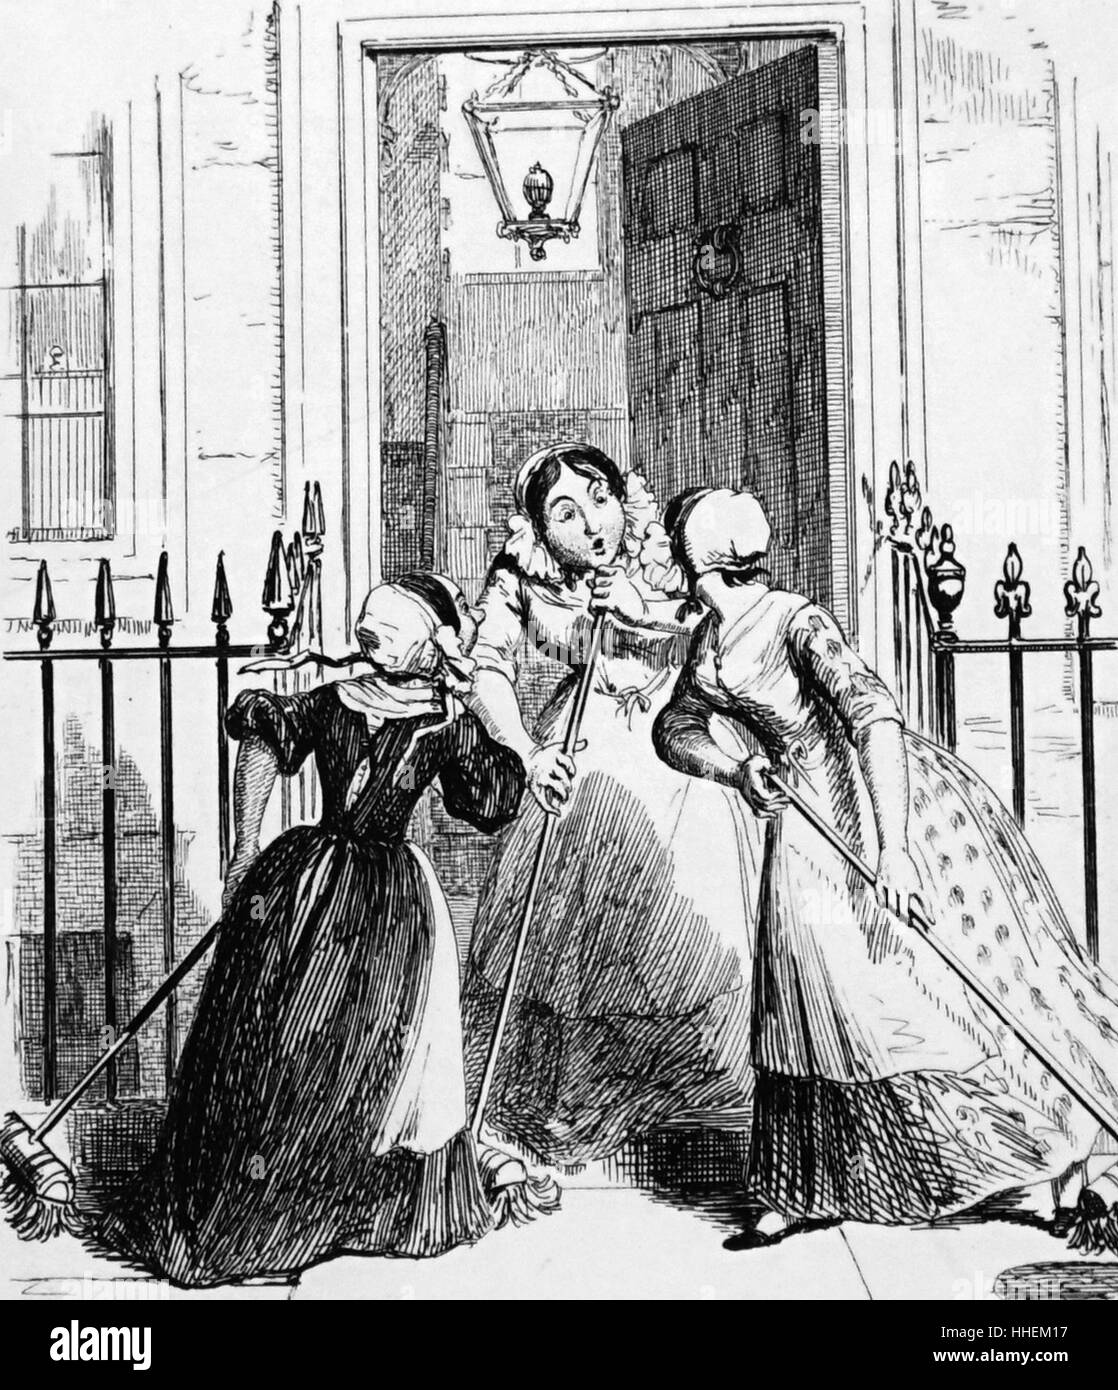 Illustration depicting maids from adjoining terraced houses making the most of ''sweeping the steps'' as an opportunity for a good gossip. Illustrated by George Cruikshank (1792-1878) a British caricaturist and book illustrator. Dated 19th Century Stock Photo